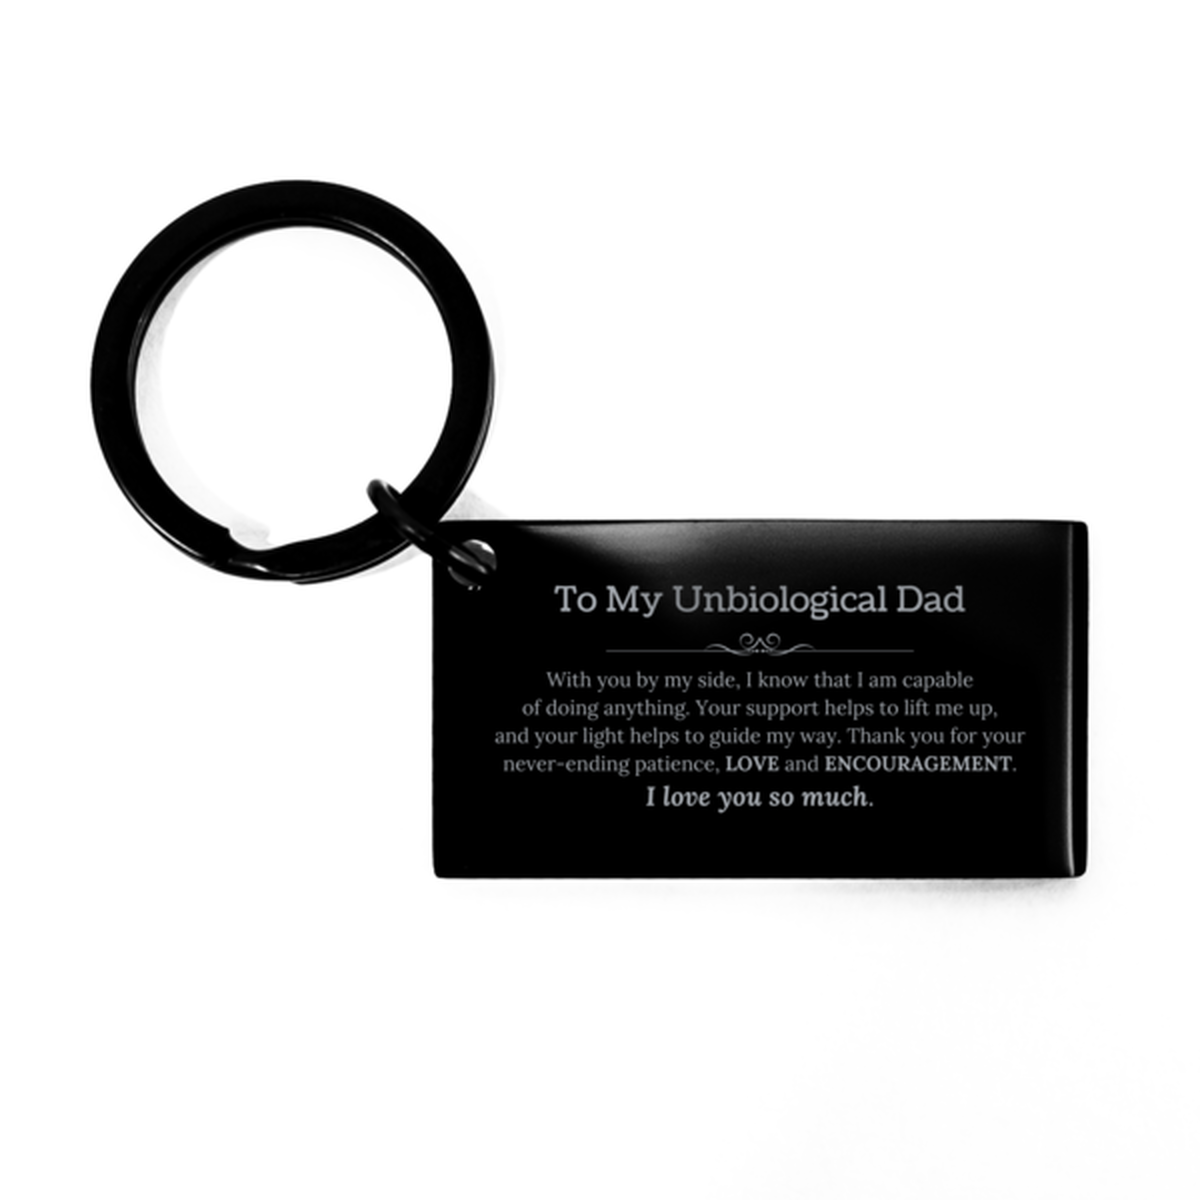 Appreciation Unbiological Dad Keychain Gifts, To My Unbiological Dad Birthday Christmas Wedding Keepsake Gifts for Unbiological Dad With you by my side, I know that I am capable of doing anything. I love you so much